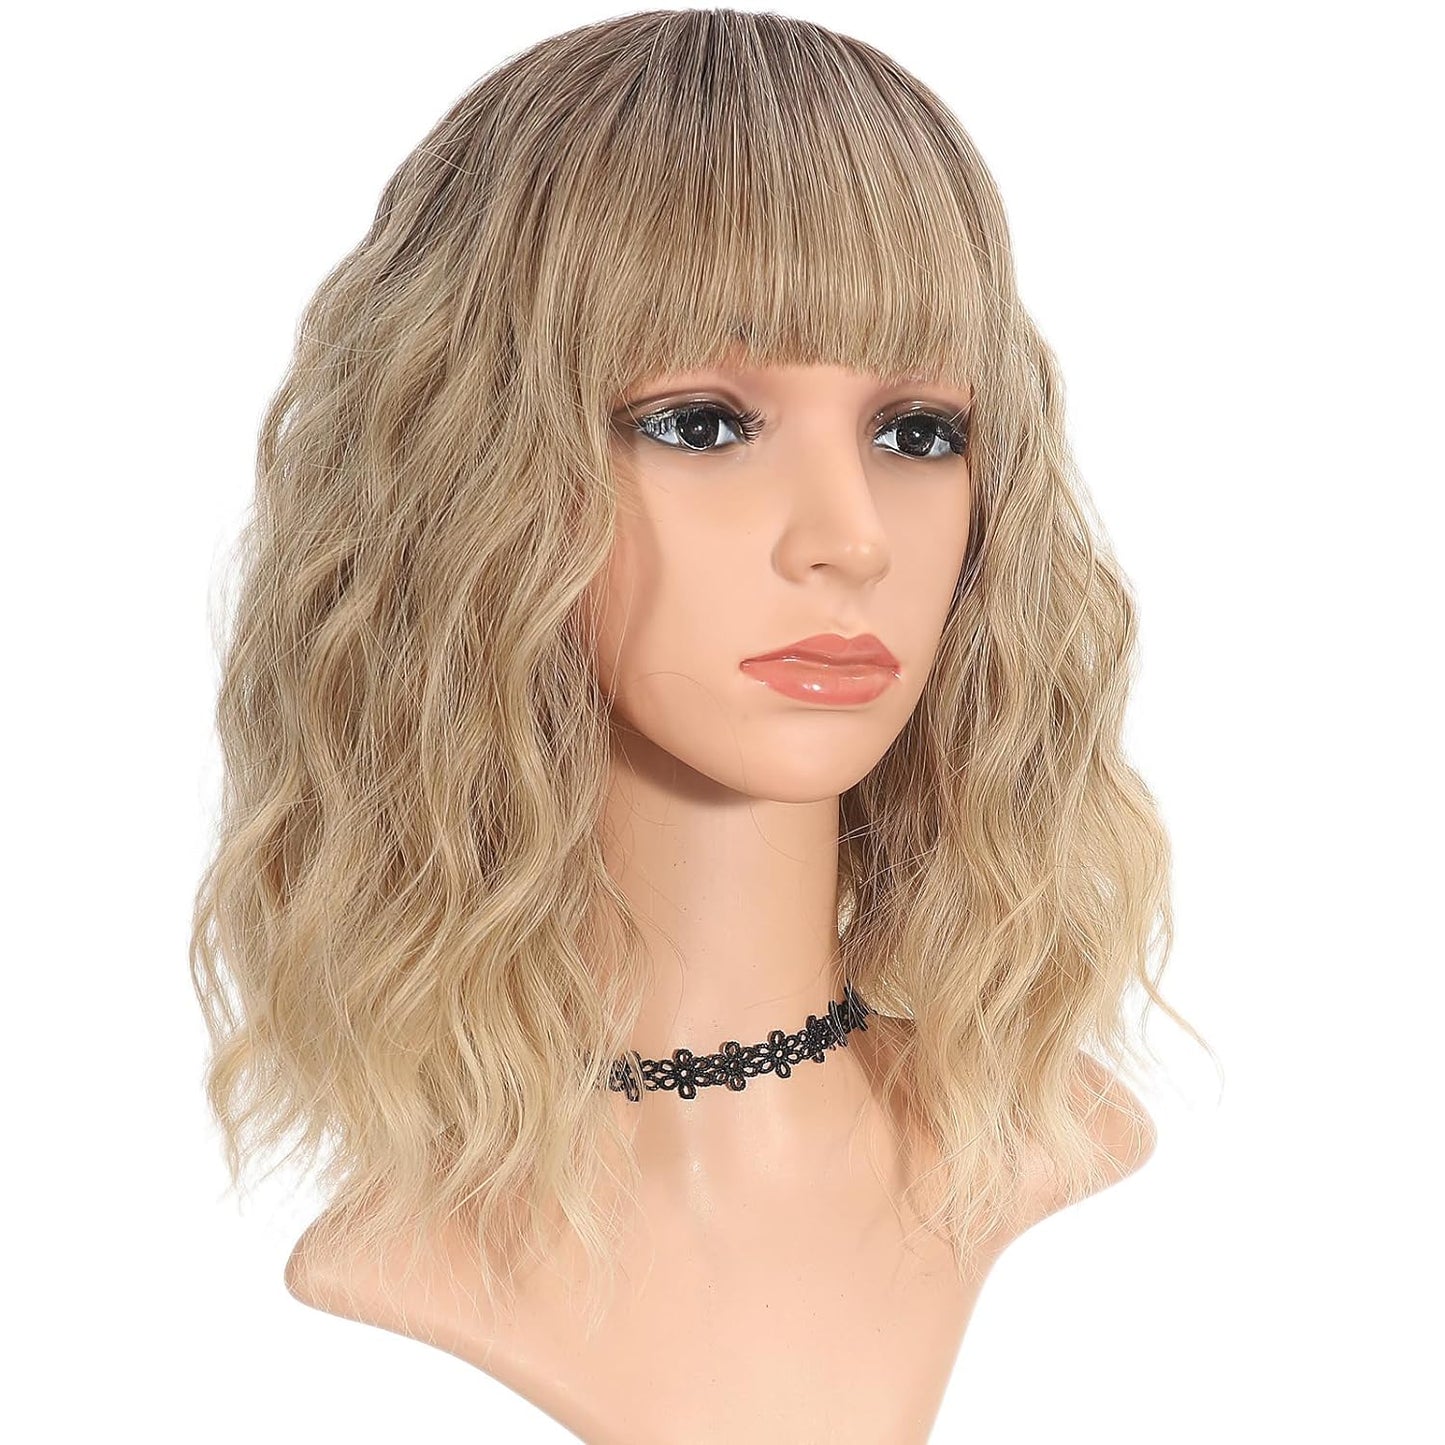 Silver Gray Wig with Bangs for Women 14 Inch Short Bob Wavy Curly Wig Gray Hair Wigs Heat Resistant Synthetic Wigs